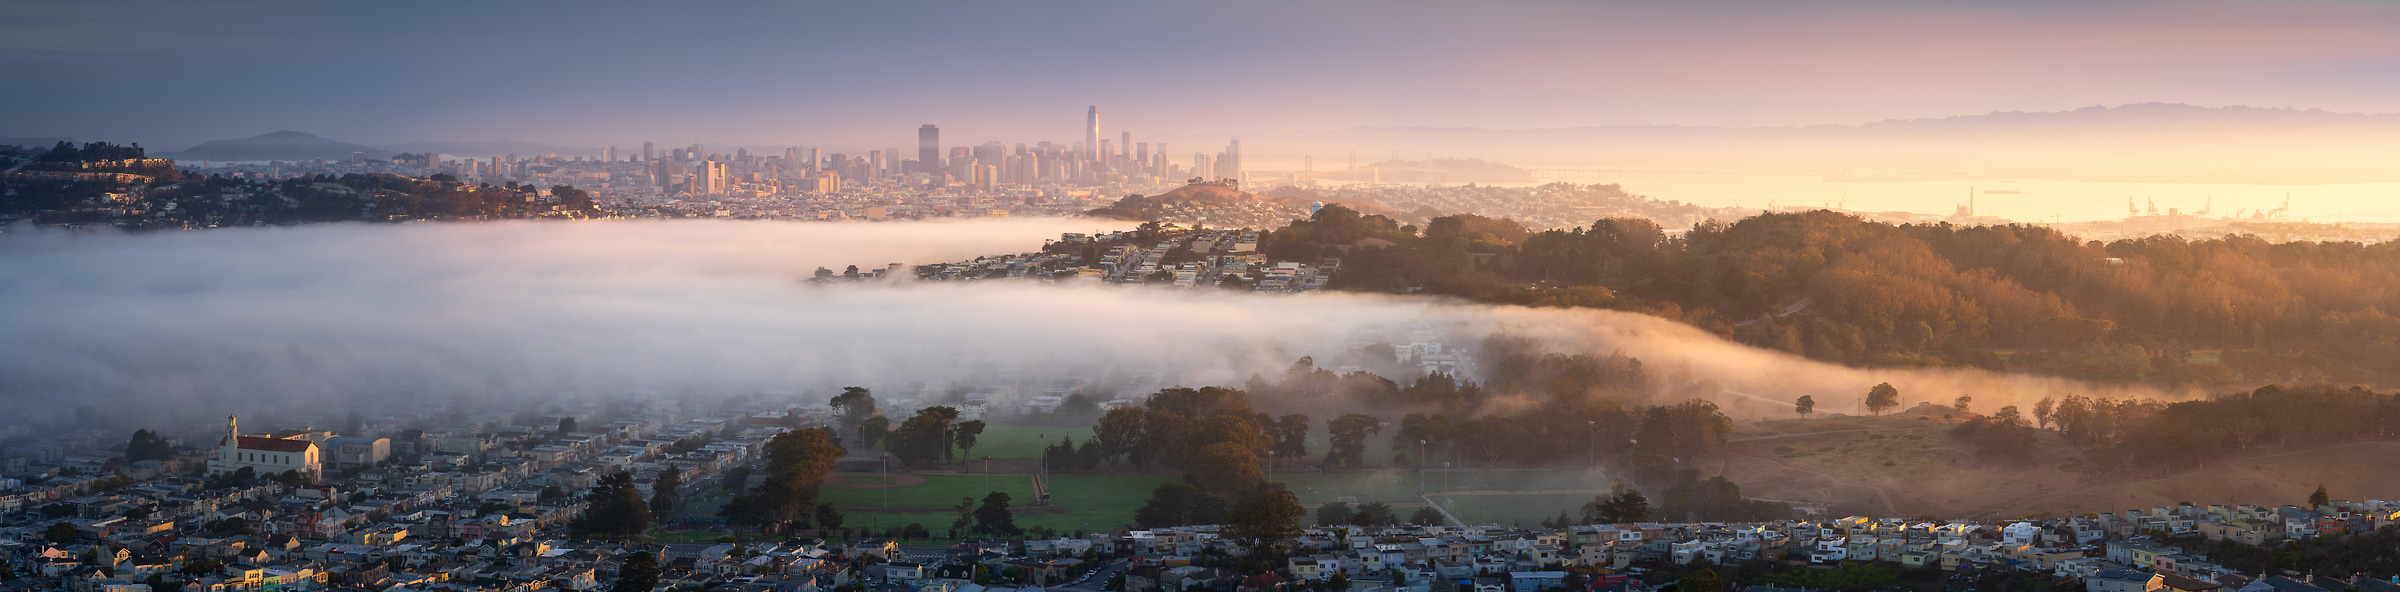 415 megapixels! A very high resolution, large-format VAST photo print of a San Francisco landscape at sunrise; photograph created by Jeff Lewis in San Francisco, California.